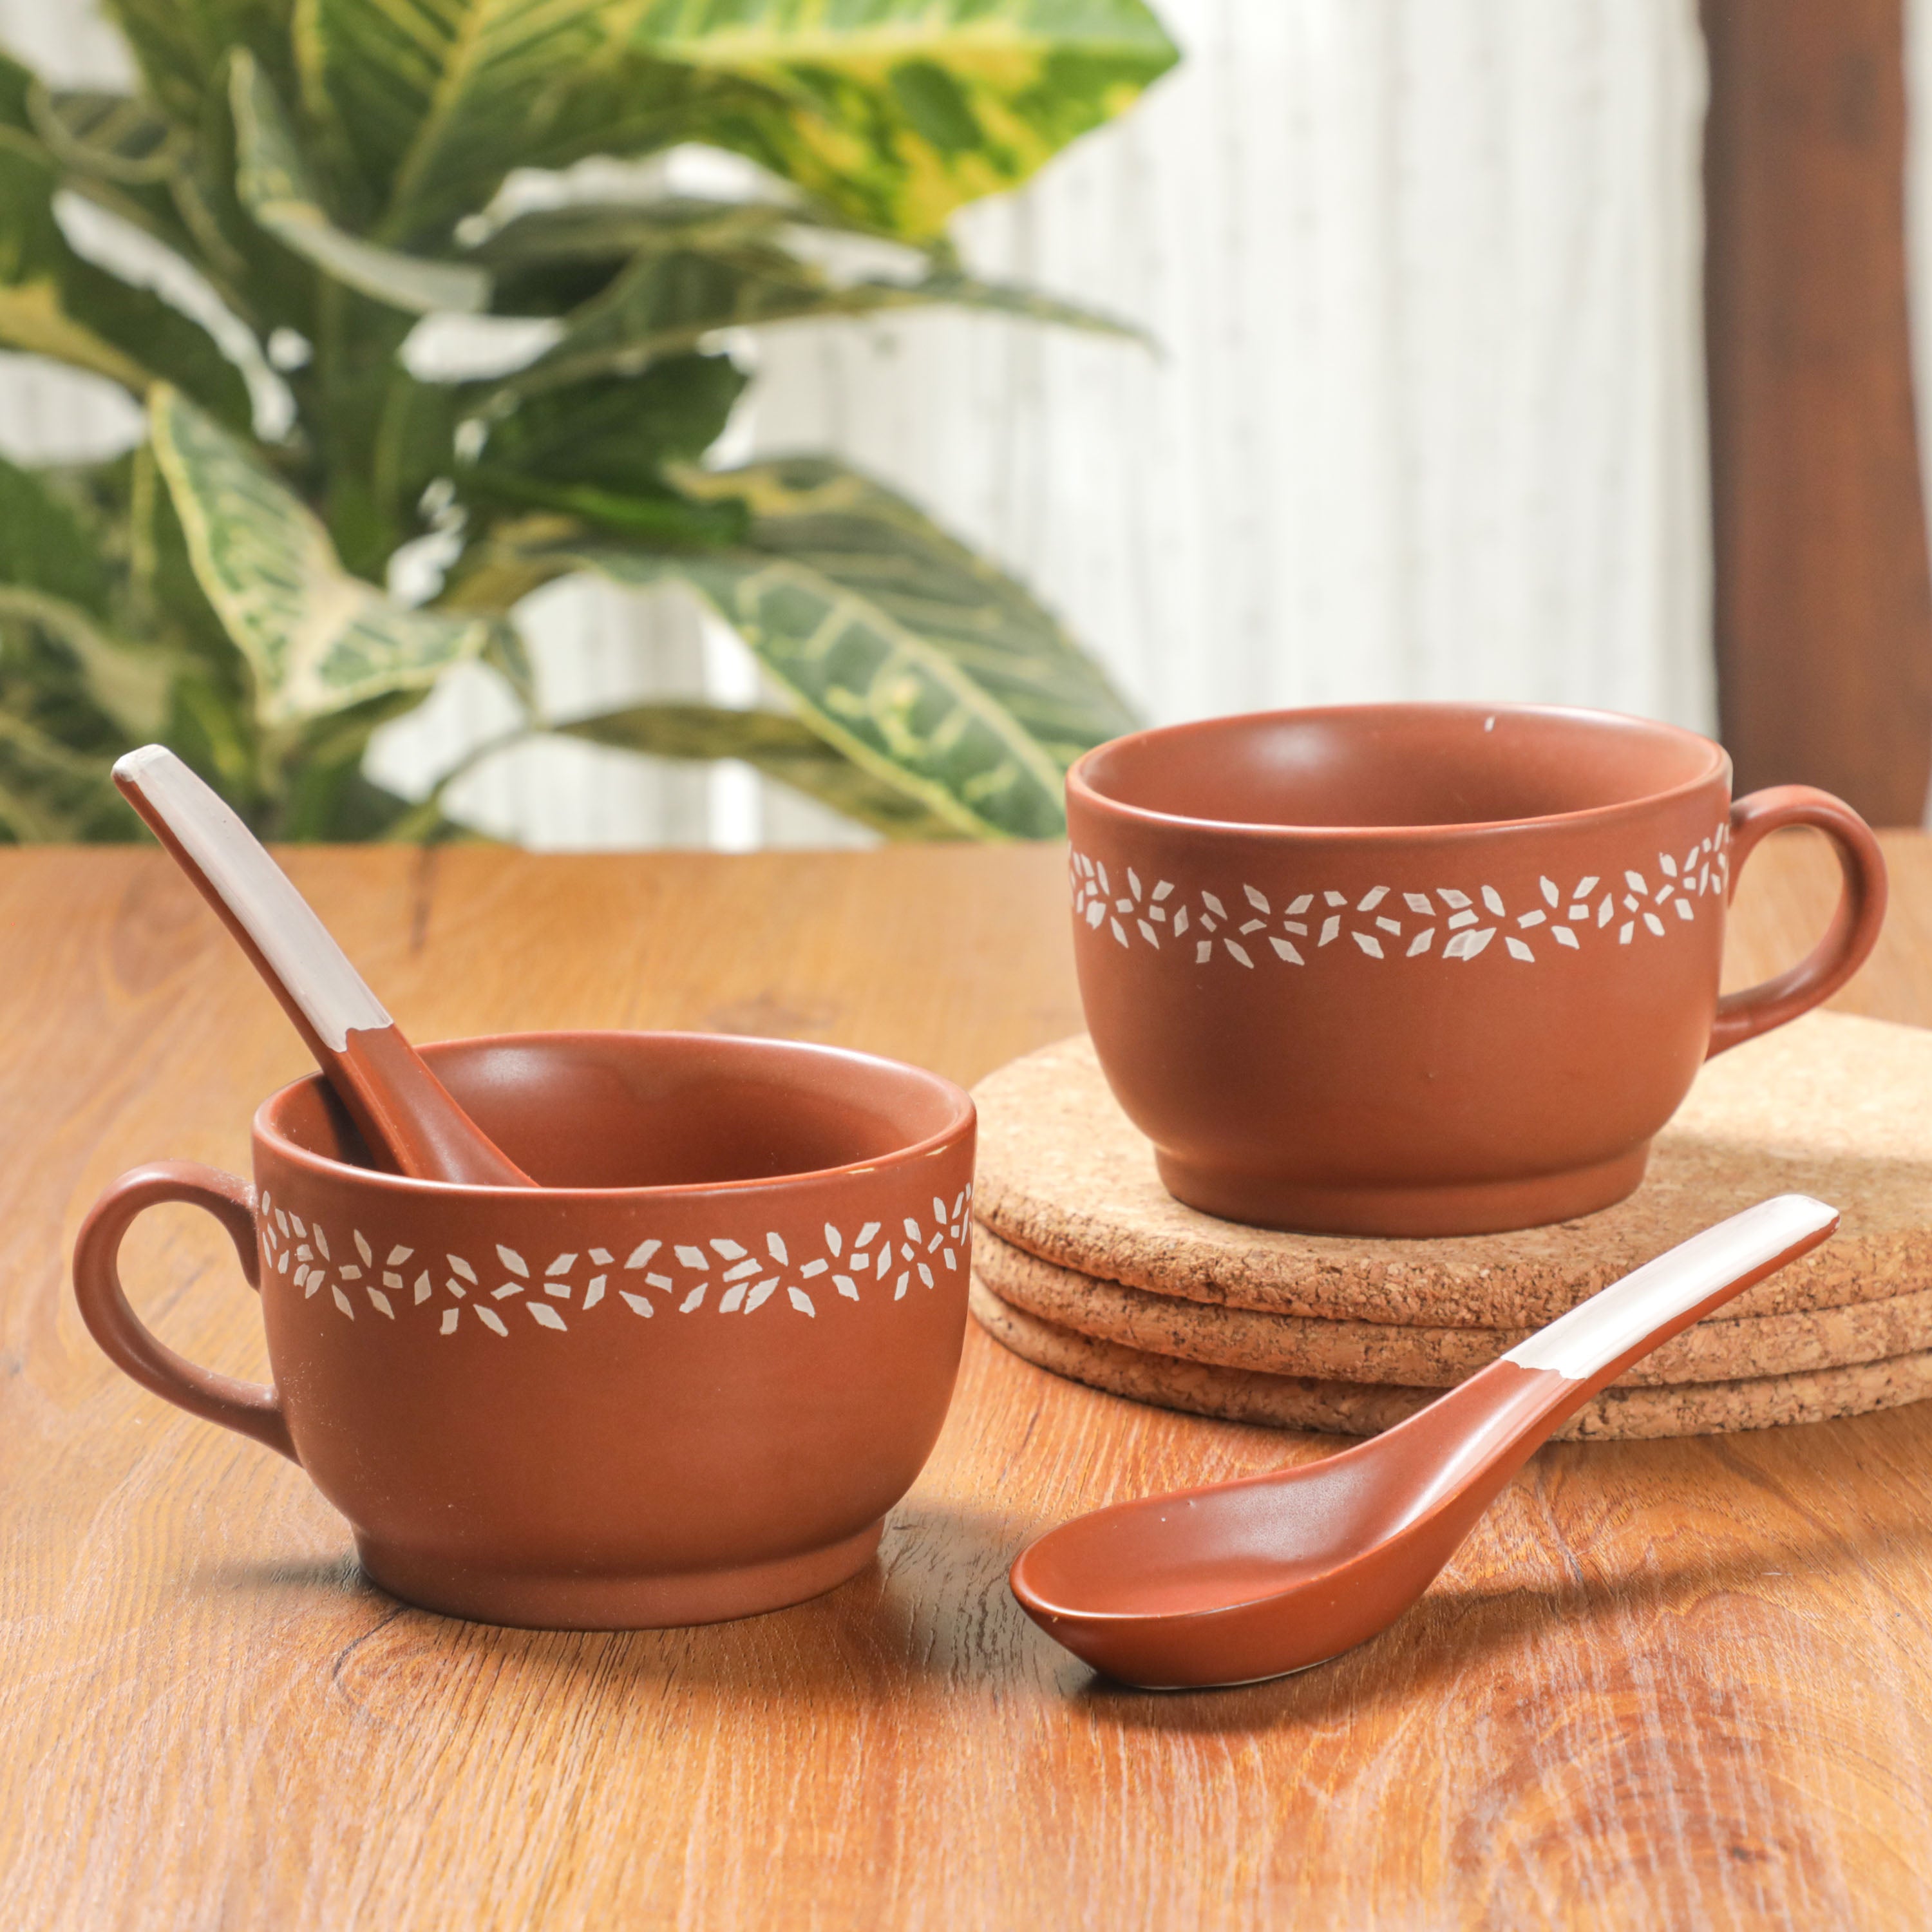 Handmade Ceramic Soup Bowl from Desifavors